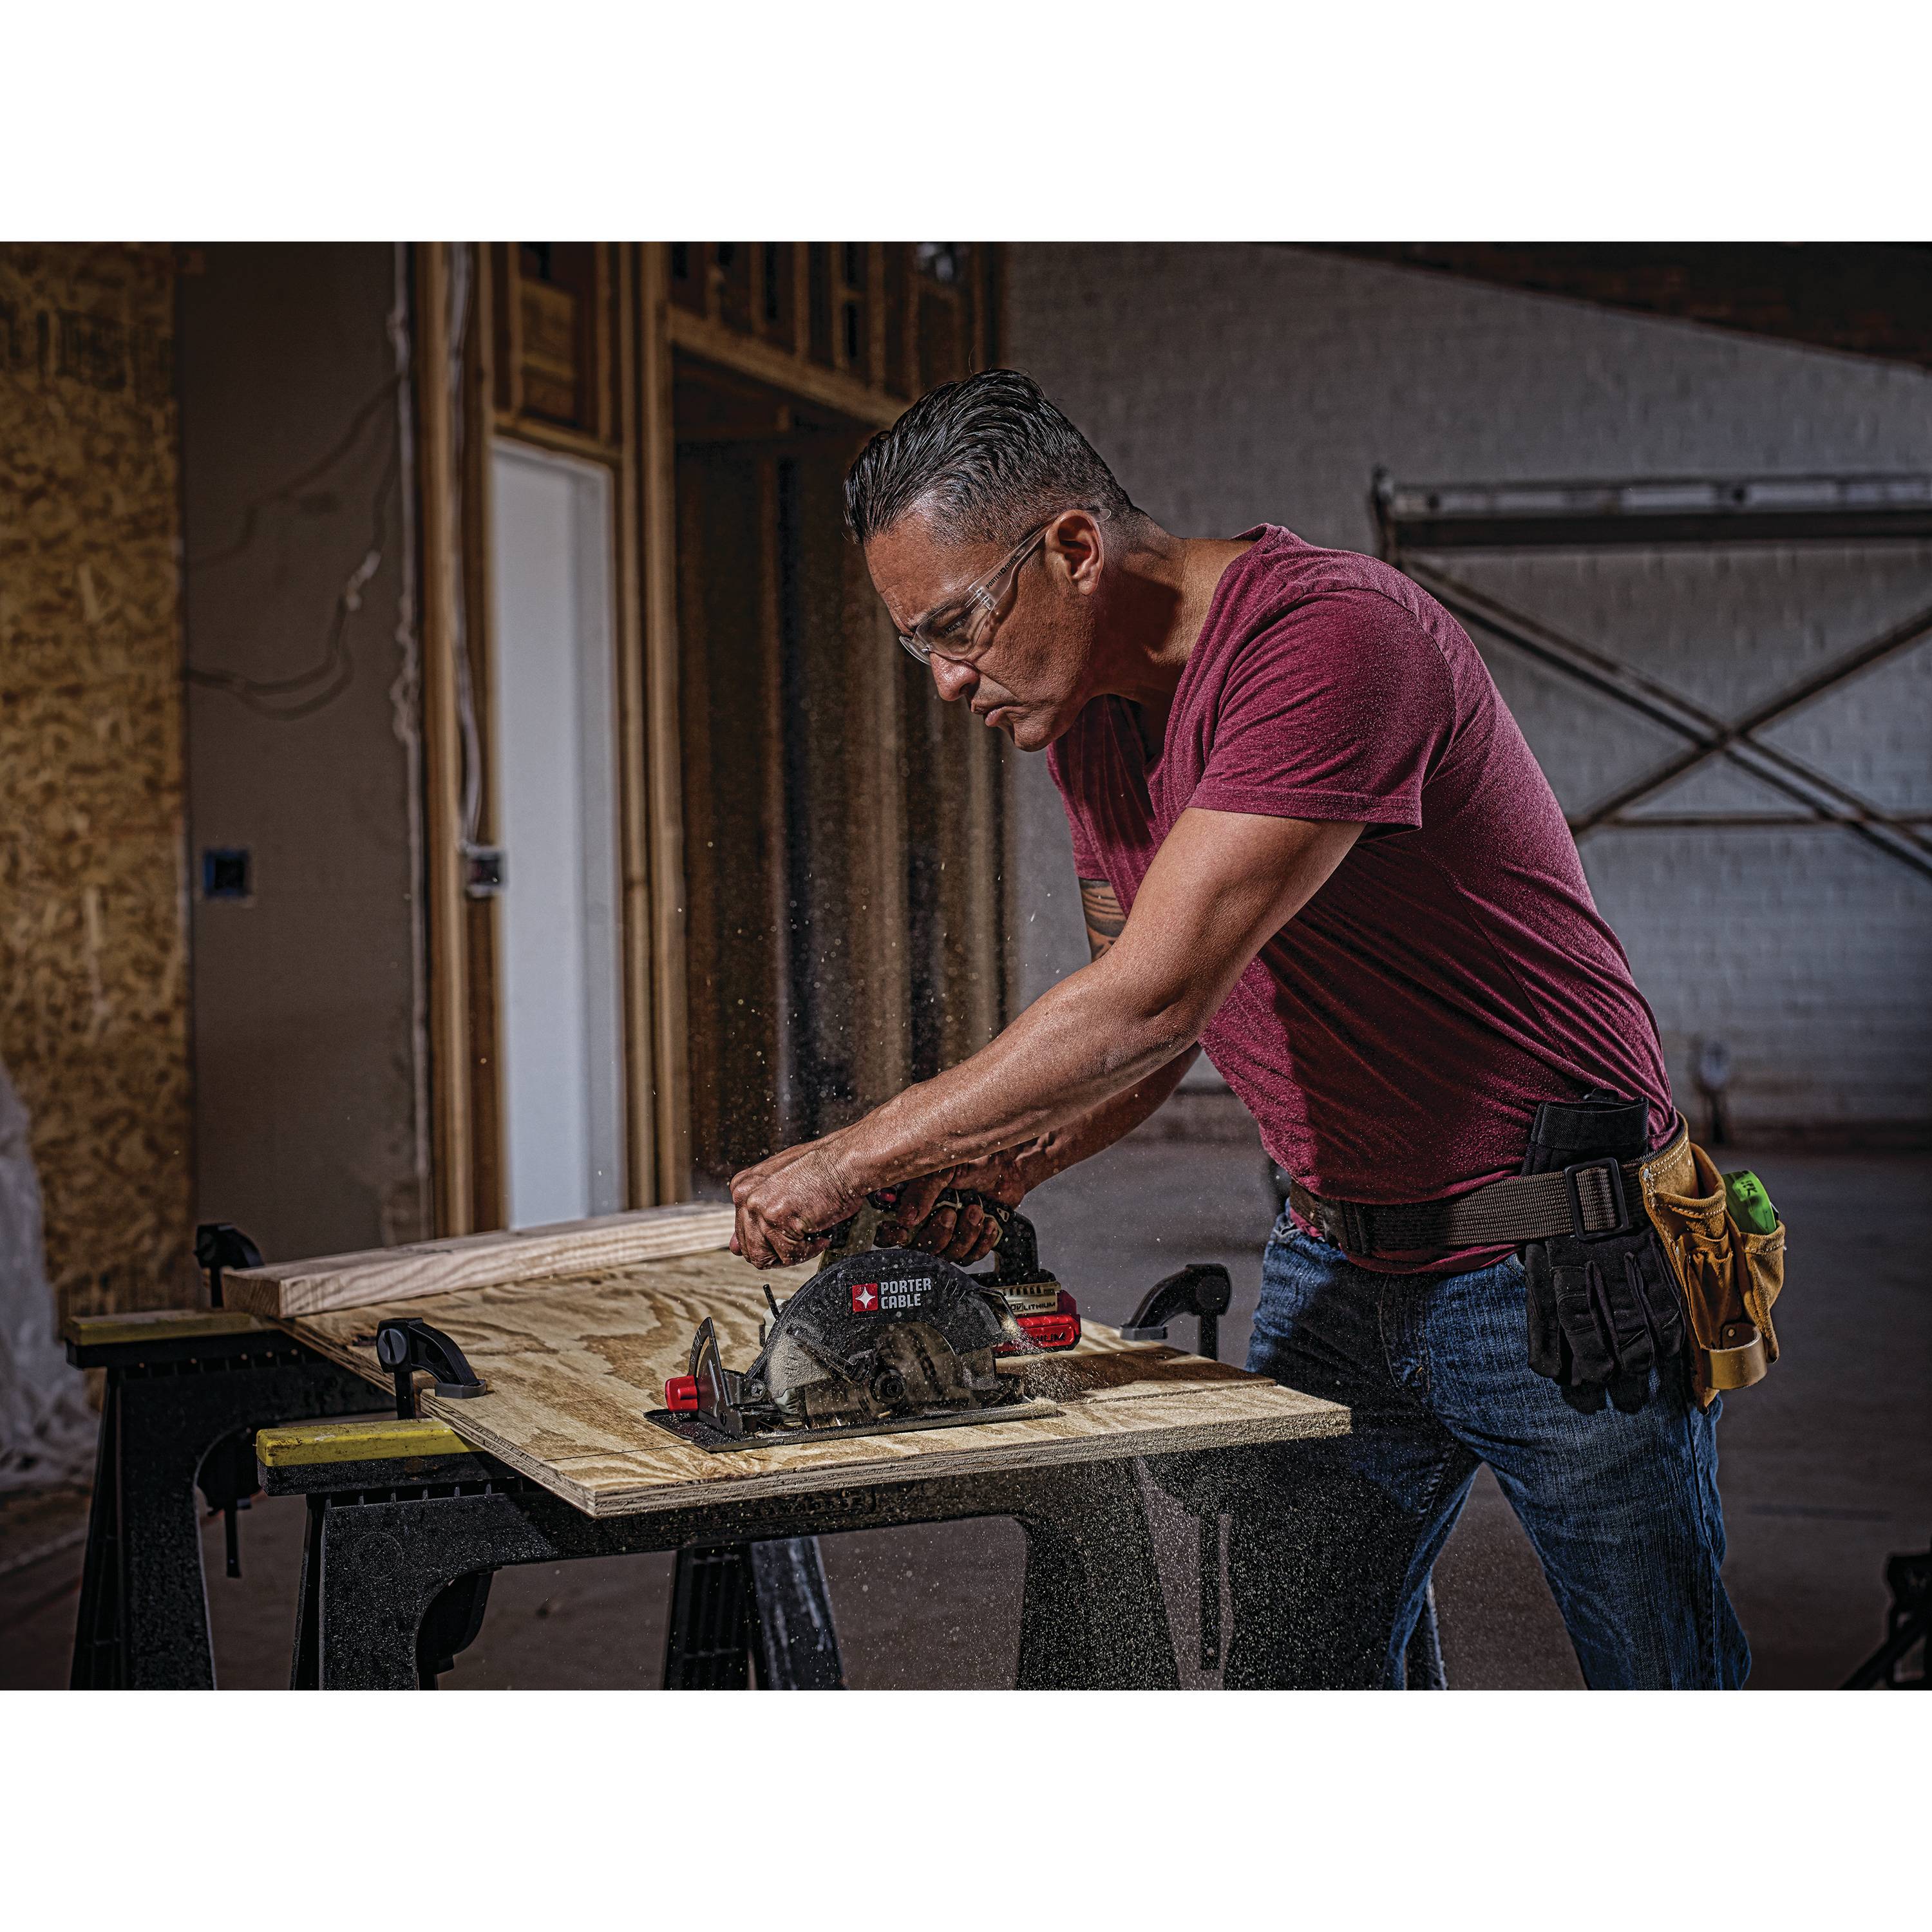 PORTER CABLE 20V MAX Lithium-Ion 6.5-Inch Cordless Circular Saw (Bare Tool / Battery Sold Separately), PCC660B - image 5 of 5